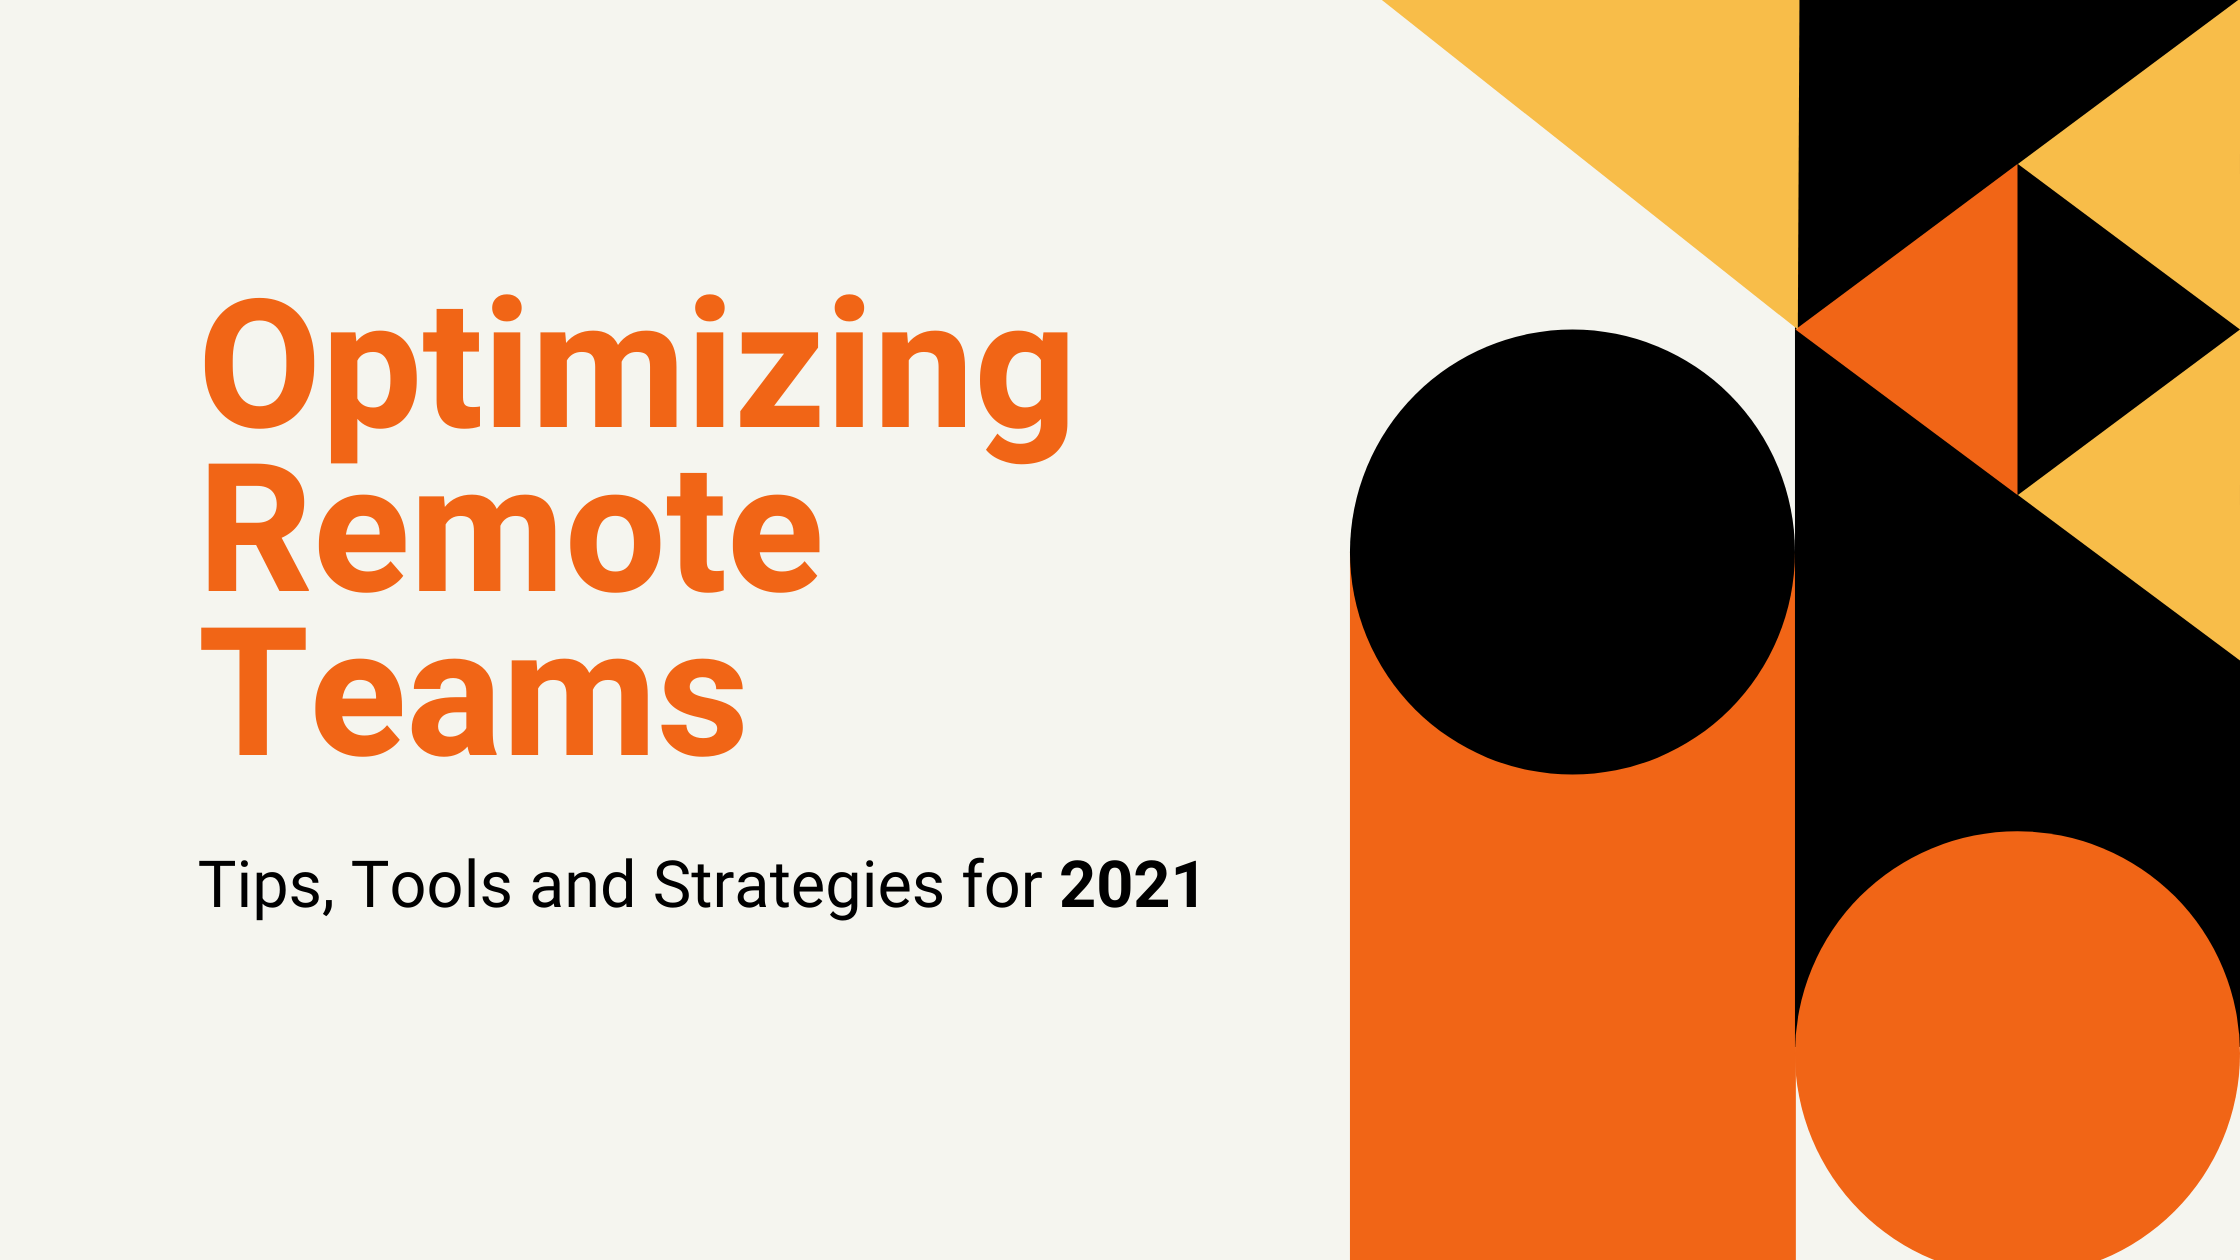 7 Ways To Boost Remote Team Productivity in 2021